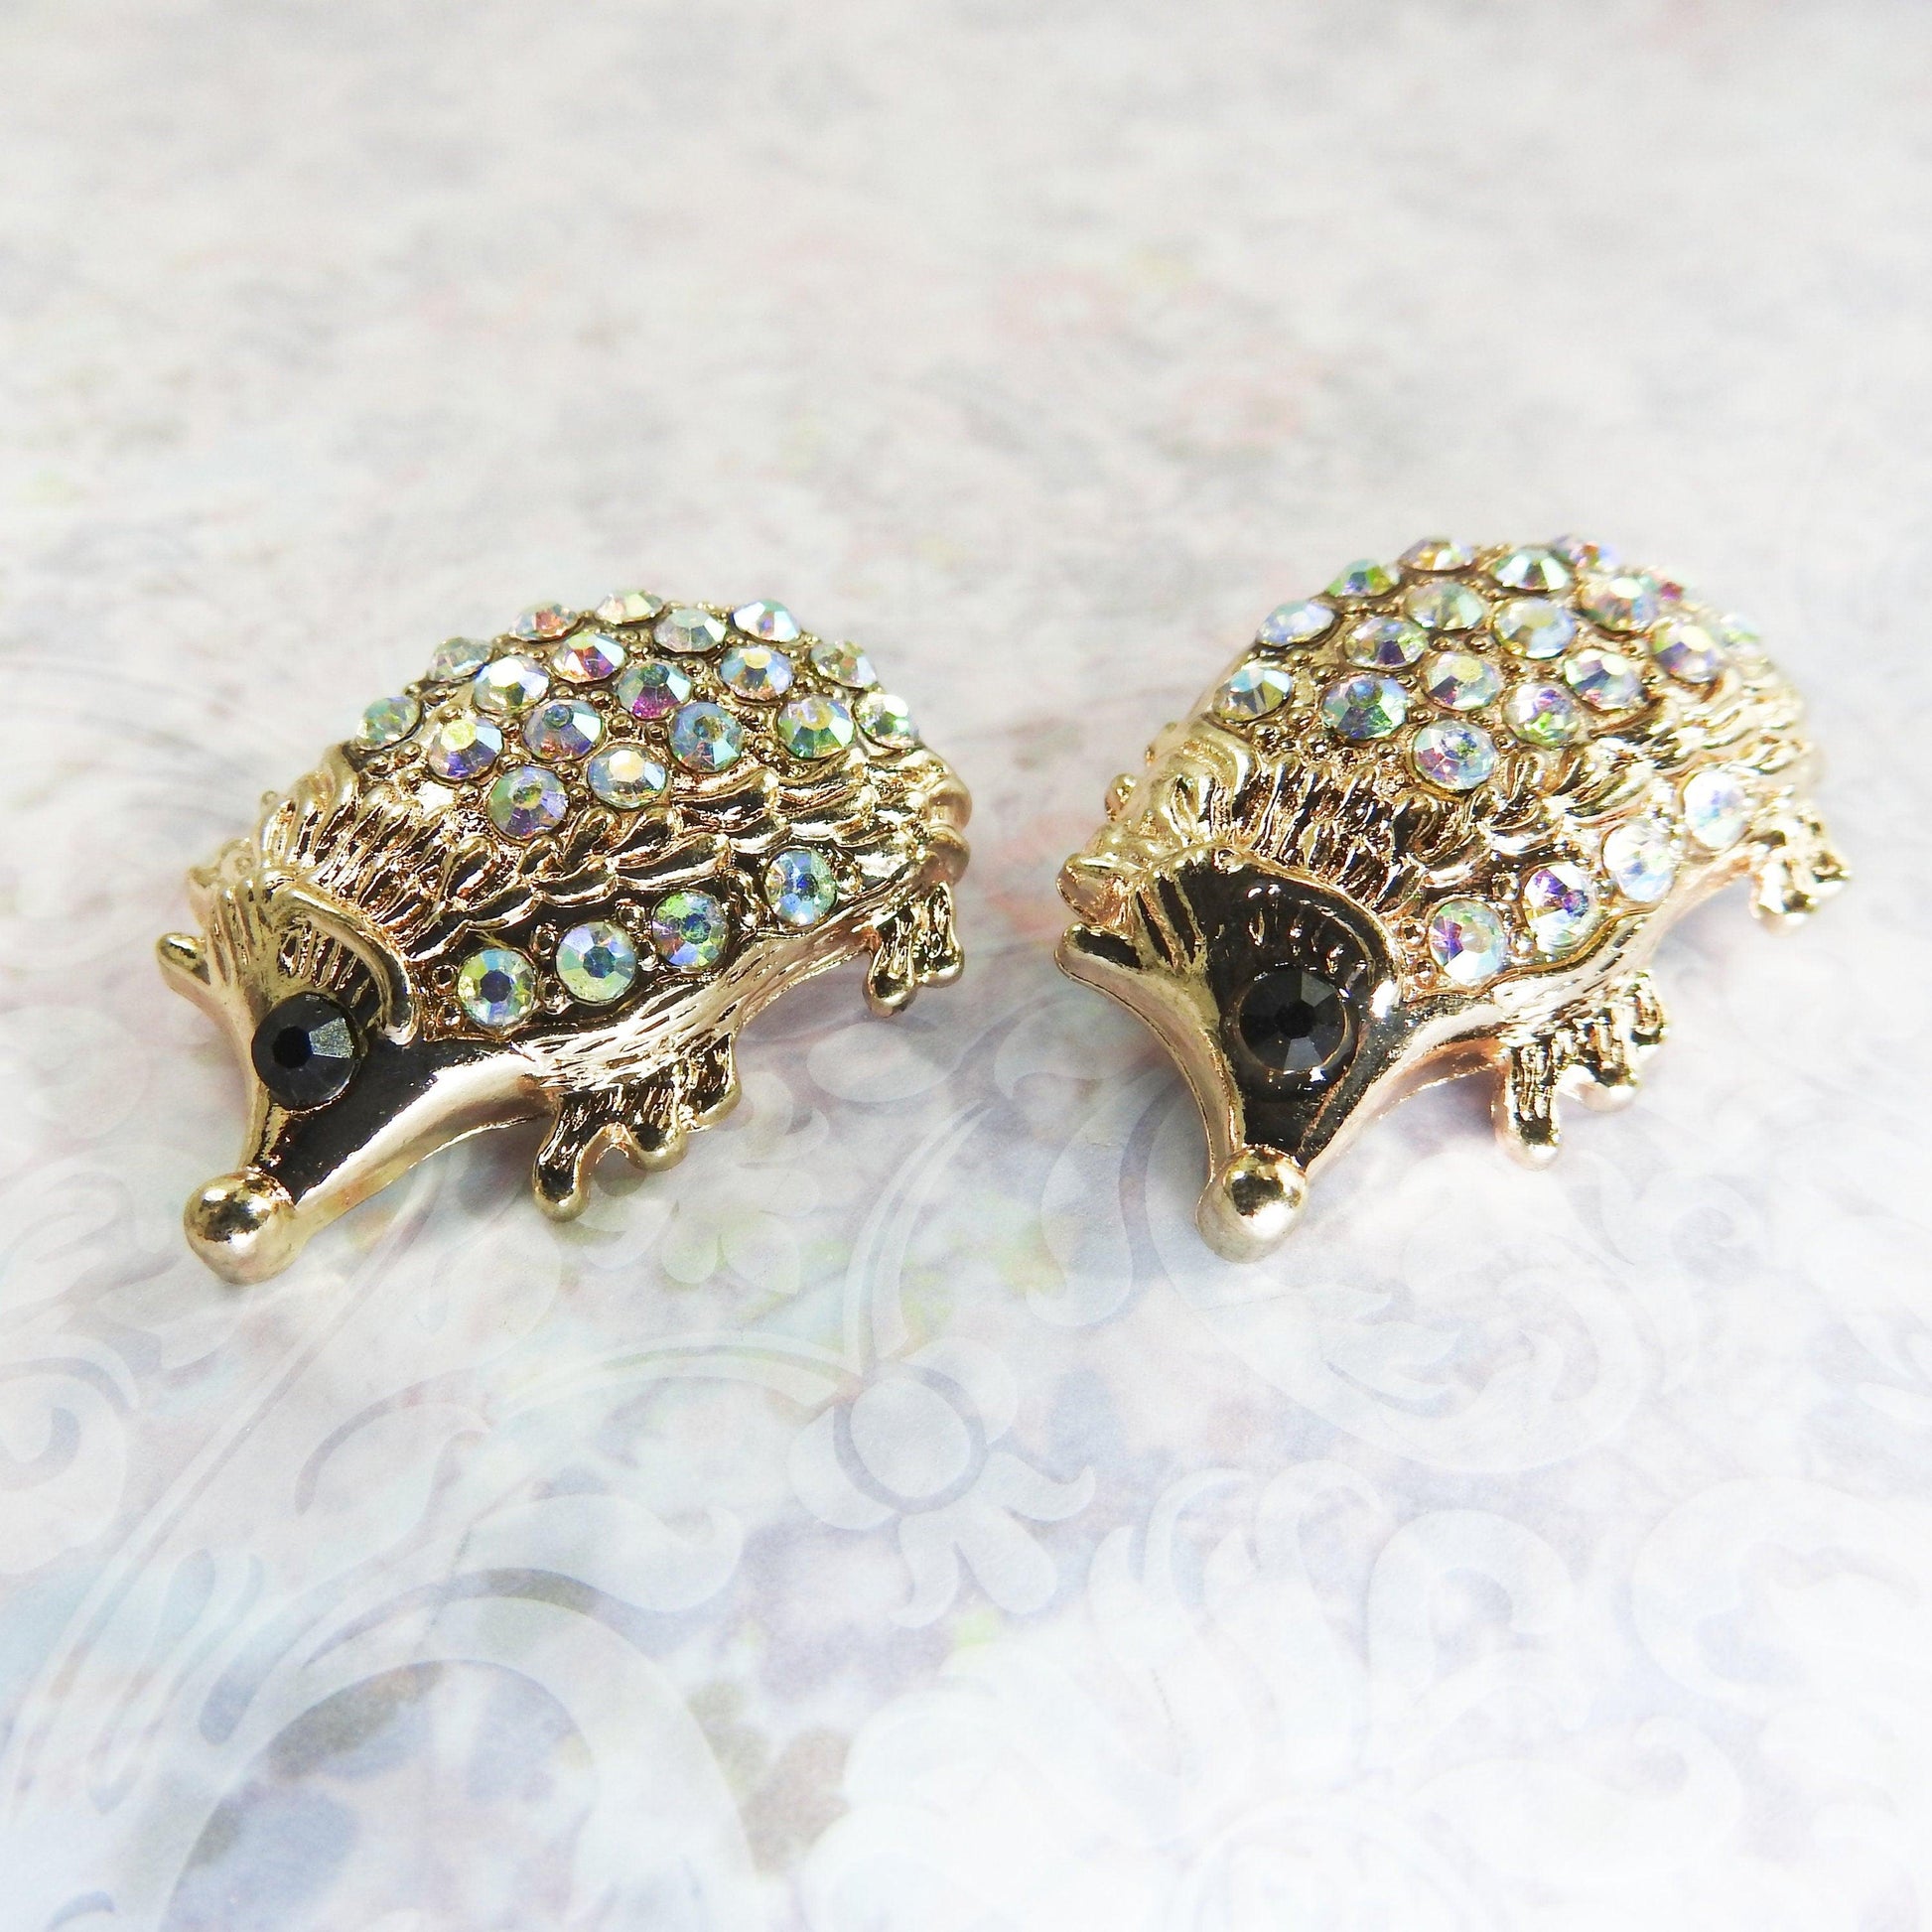 Hedgehog snap buttons with crystals aurora borealis for women's tuxedo rhinestone embellishments or bling shoe clips for sneakers, Lot of 2